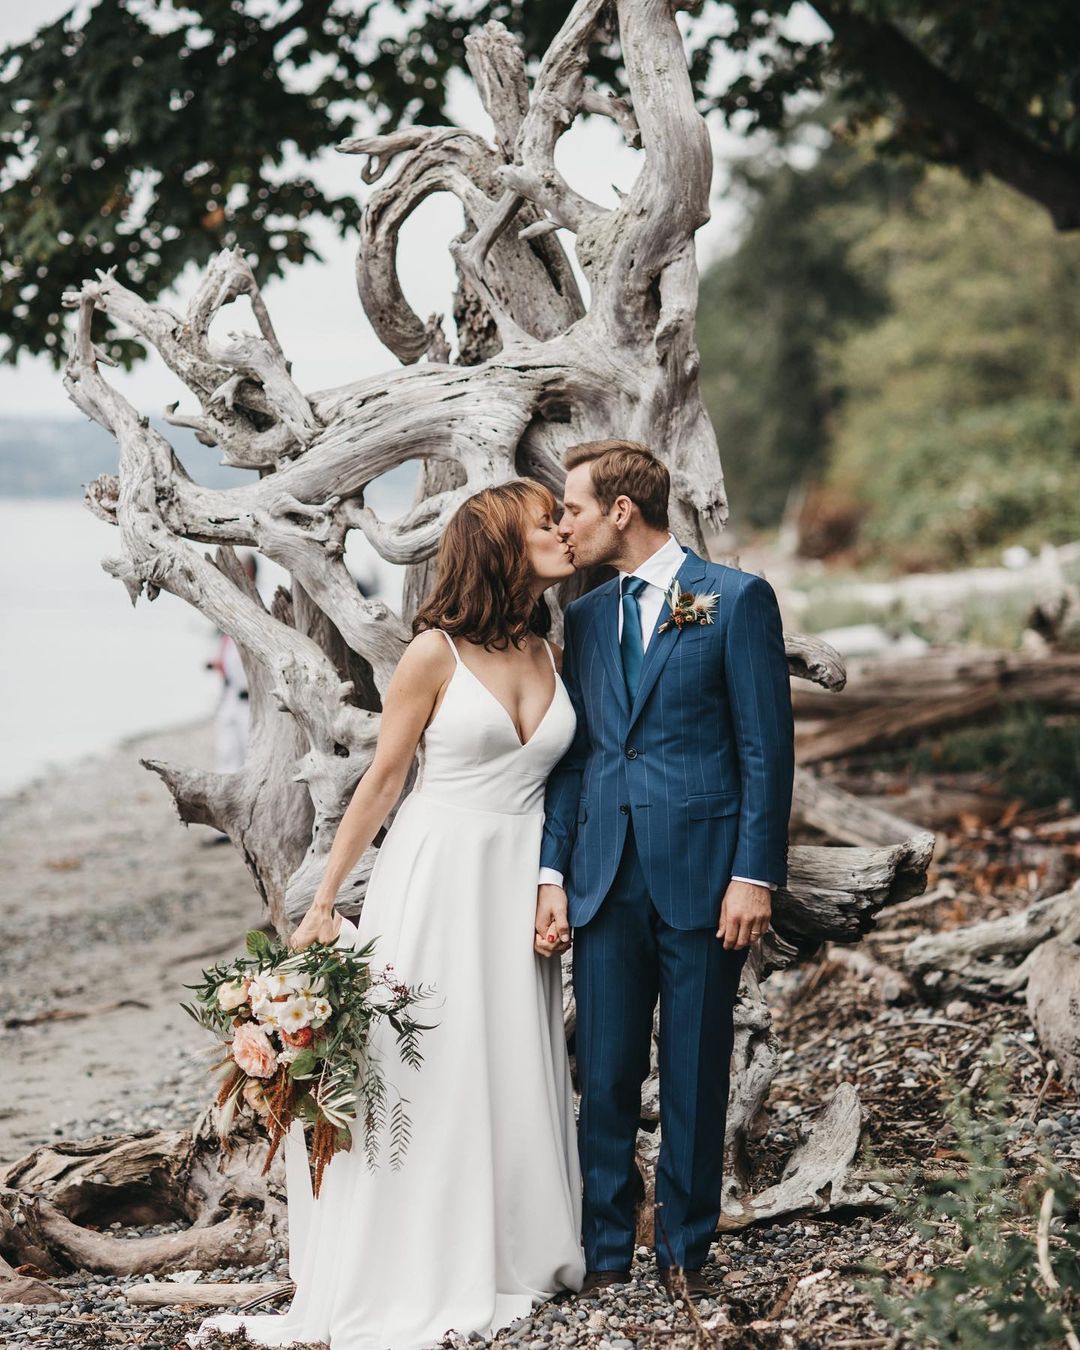 Chad Kimball wished his wife Emily Swallow a happy fourth marriage anniversary on Instagram by sharing a picture from their wedding